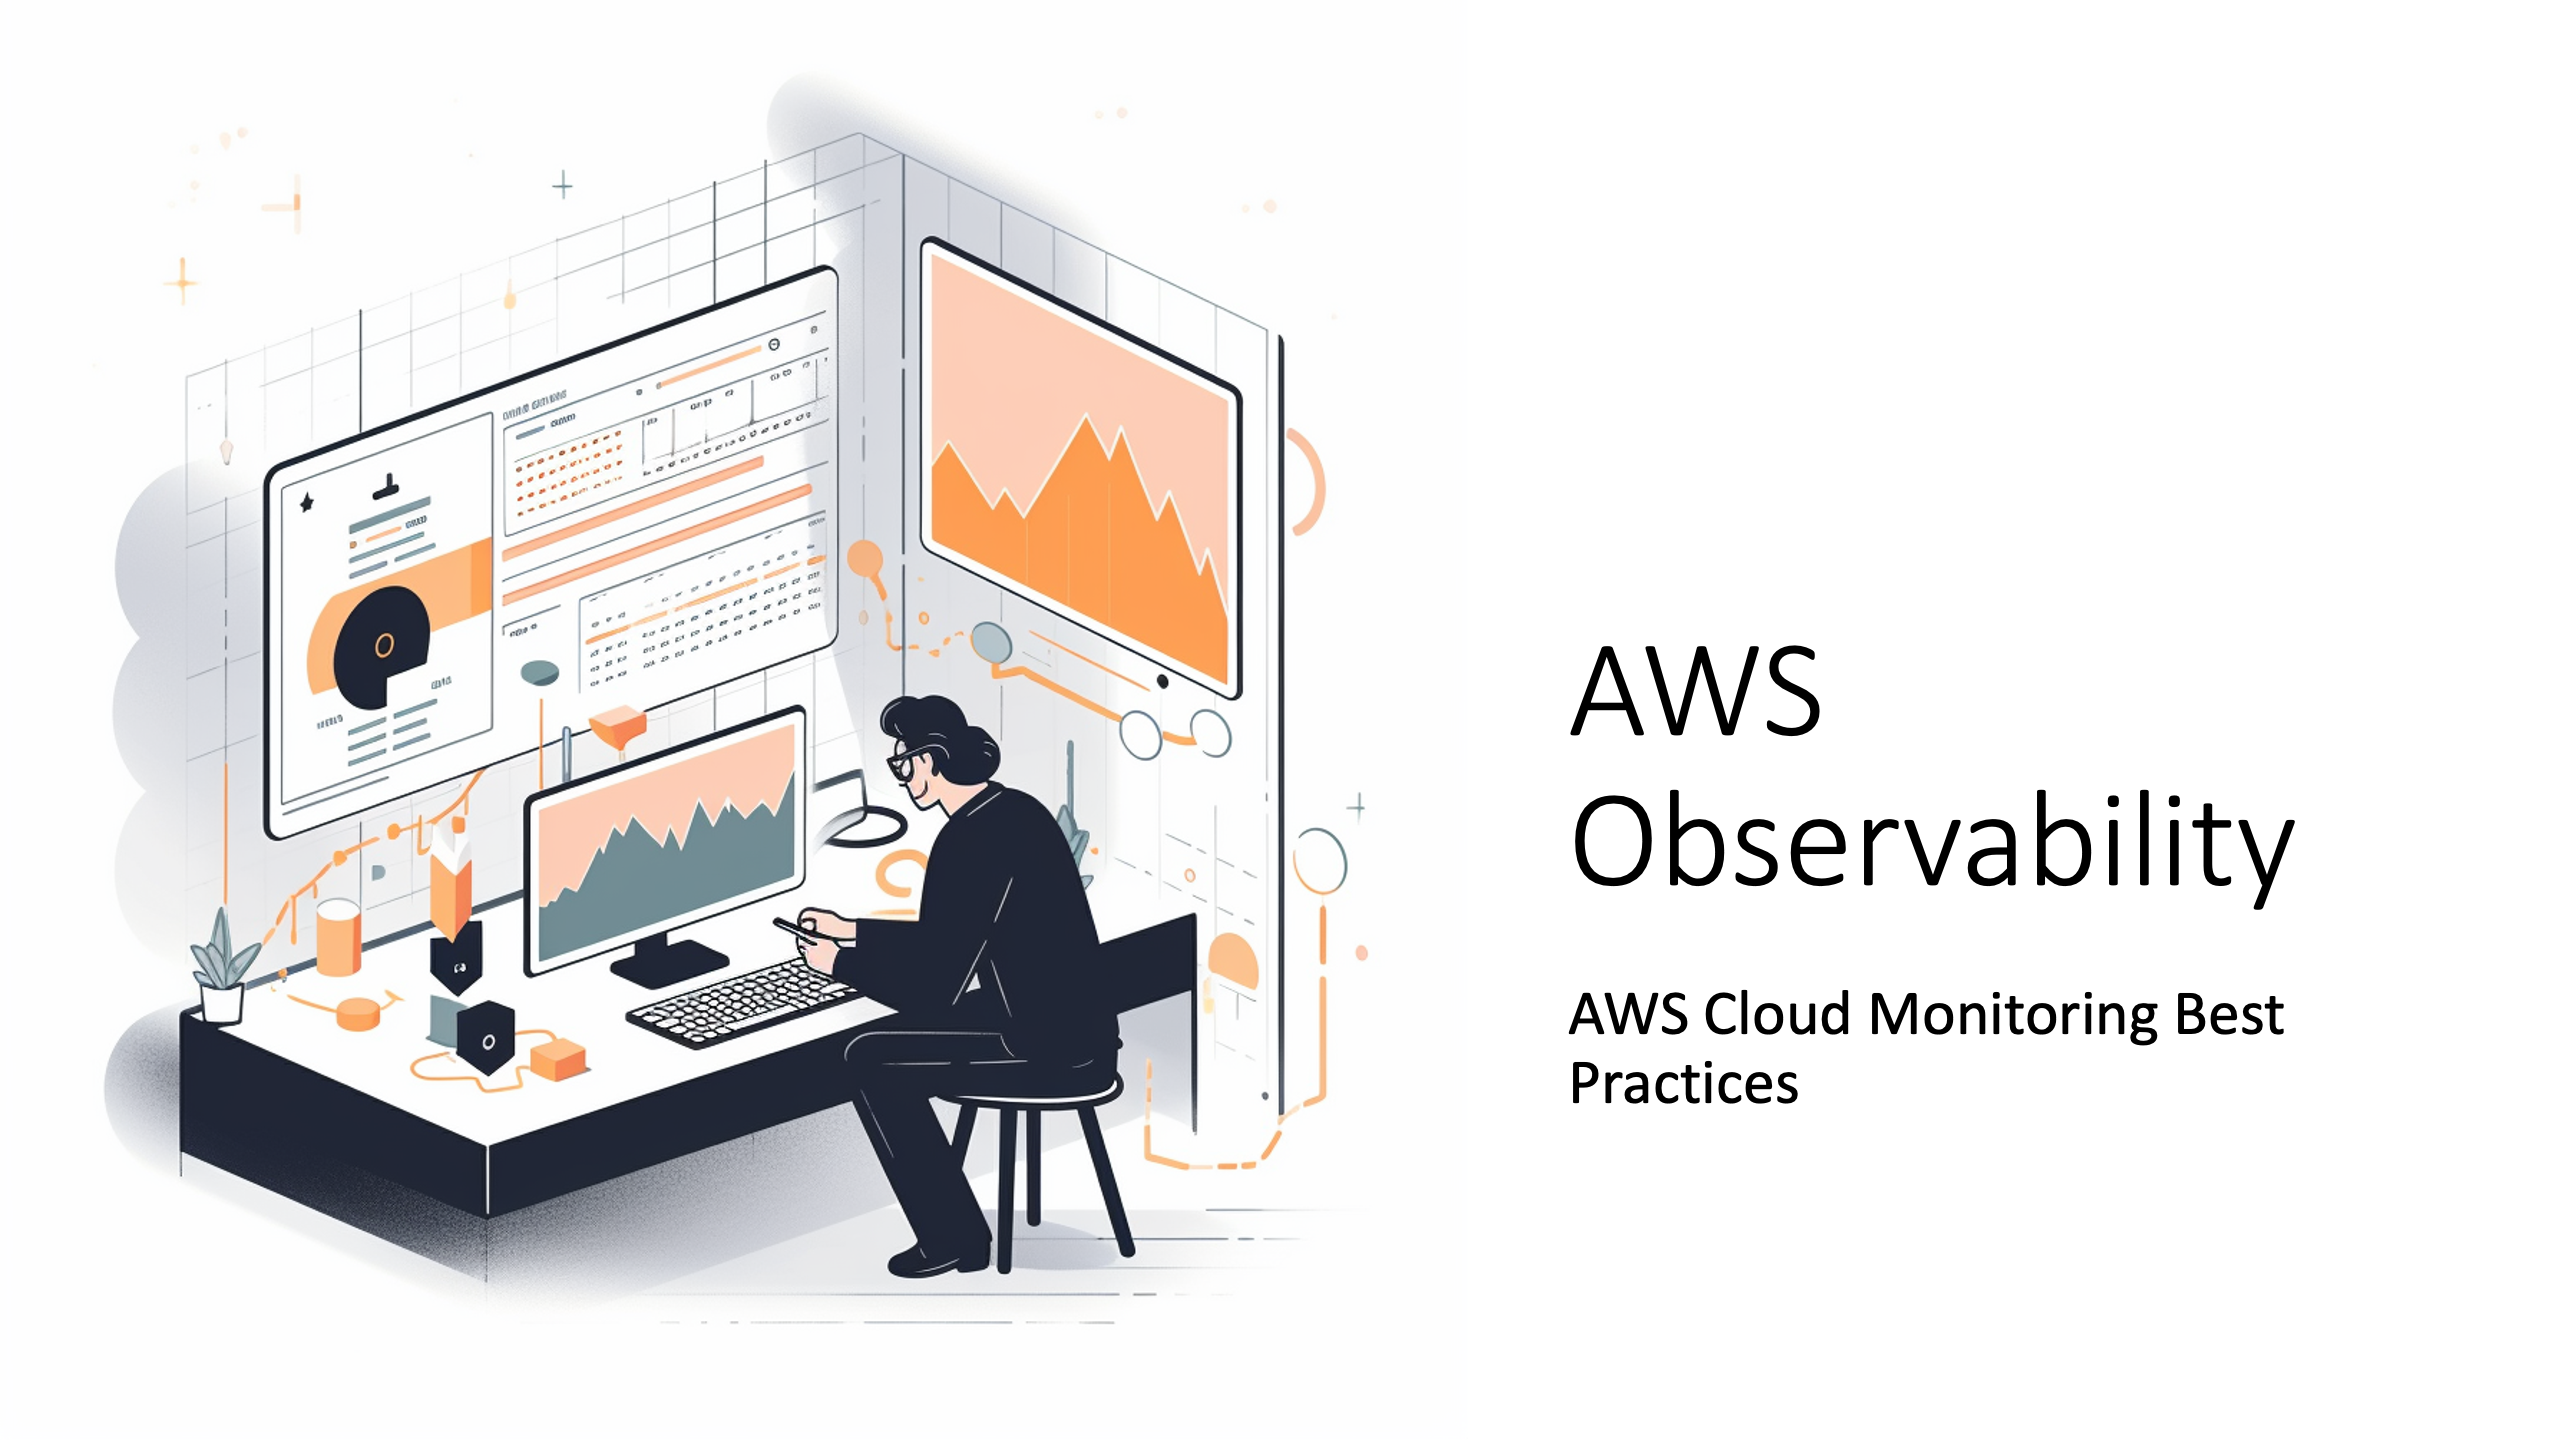 AWS Observability - AWS Cloud Monitoring Best Practices